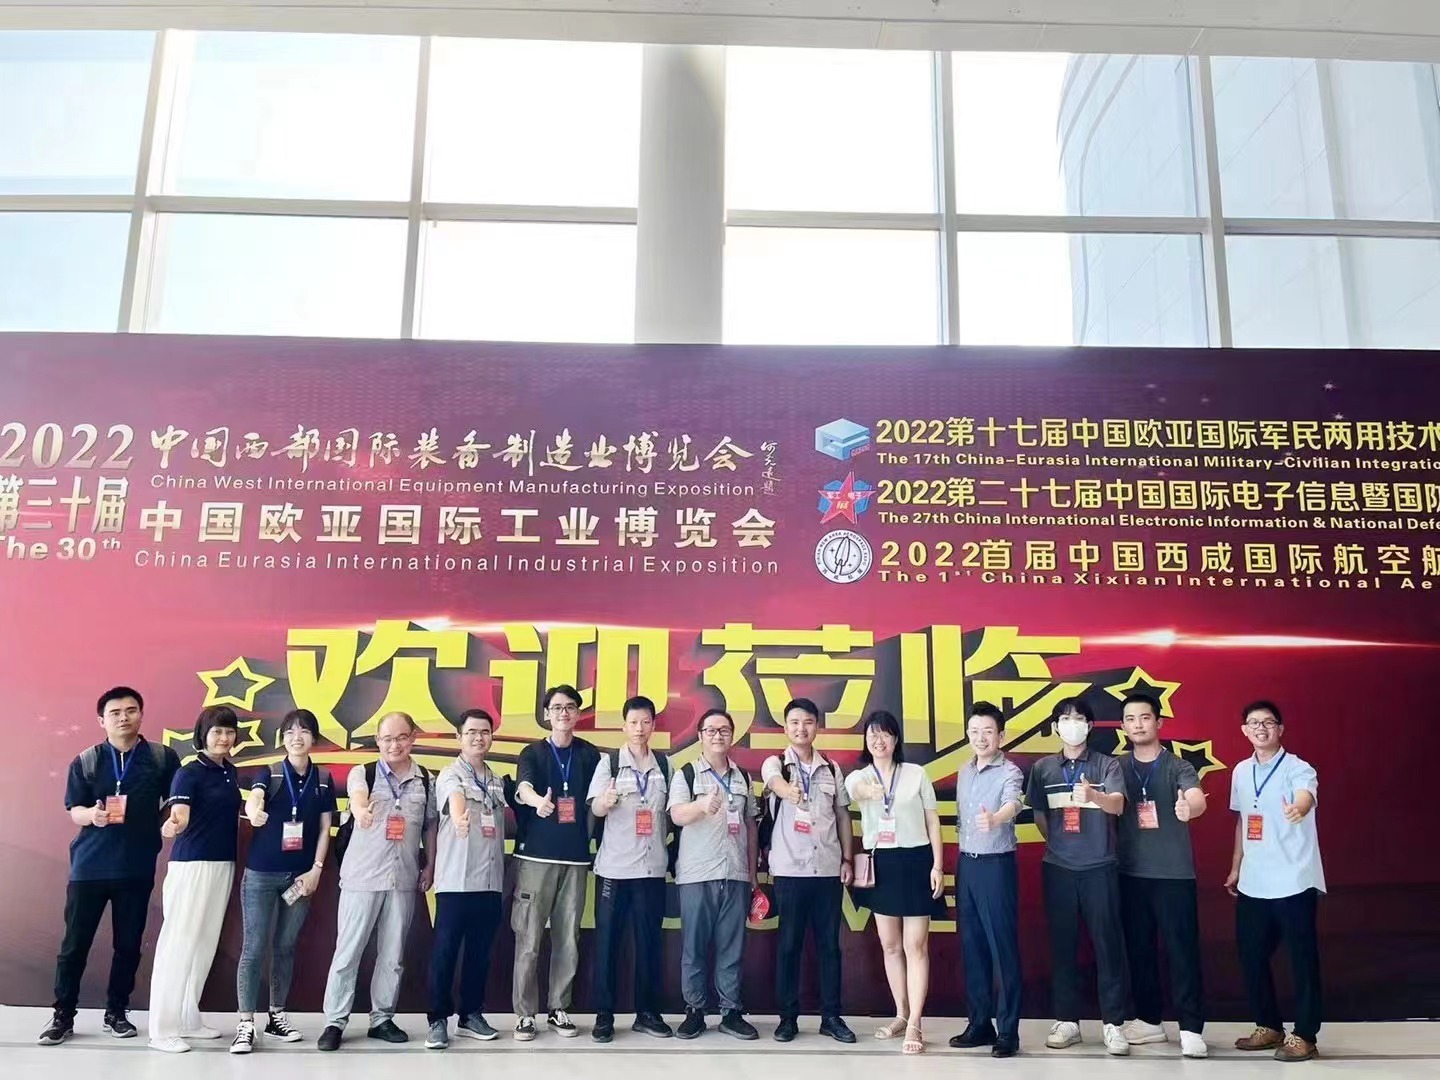 Guangzhou Huazhen was invited to participate in the 2022 Western China International Equipment Manufacturing Expo